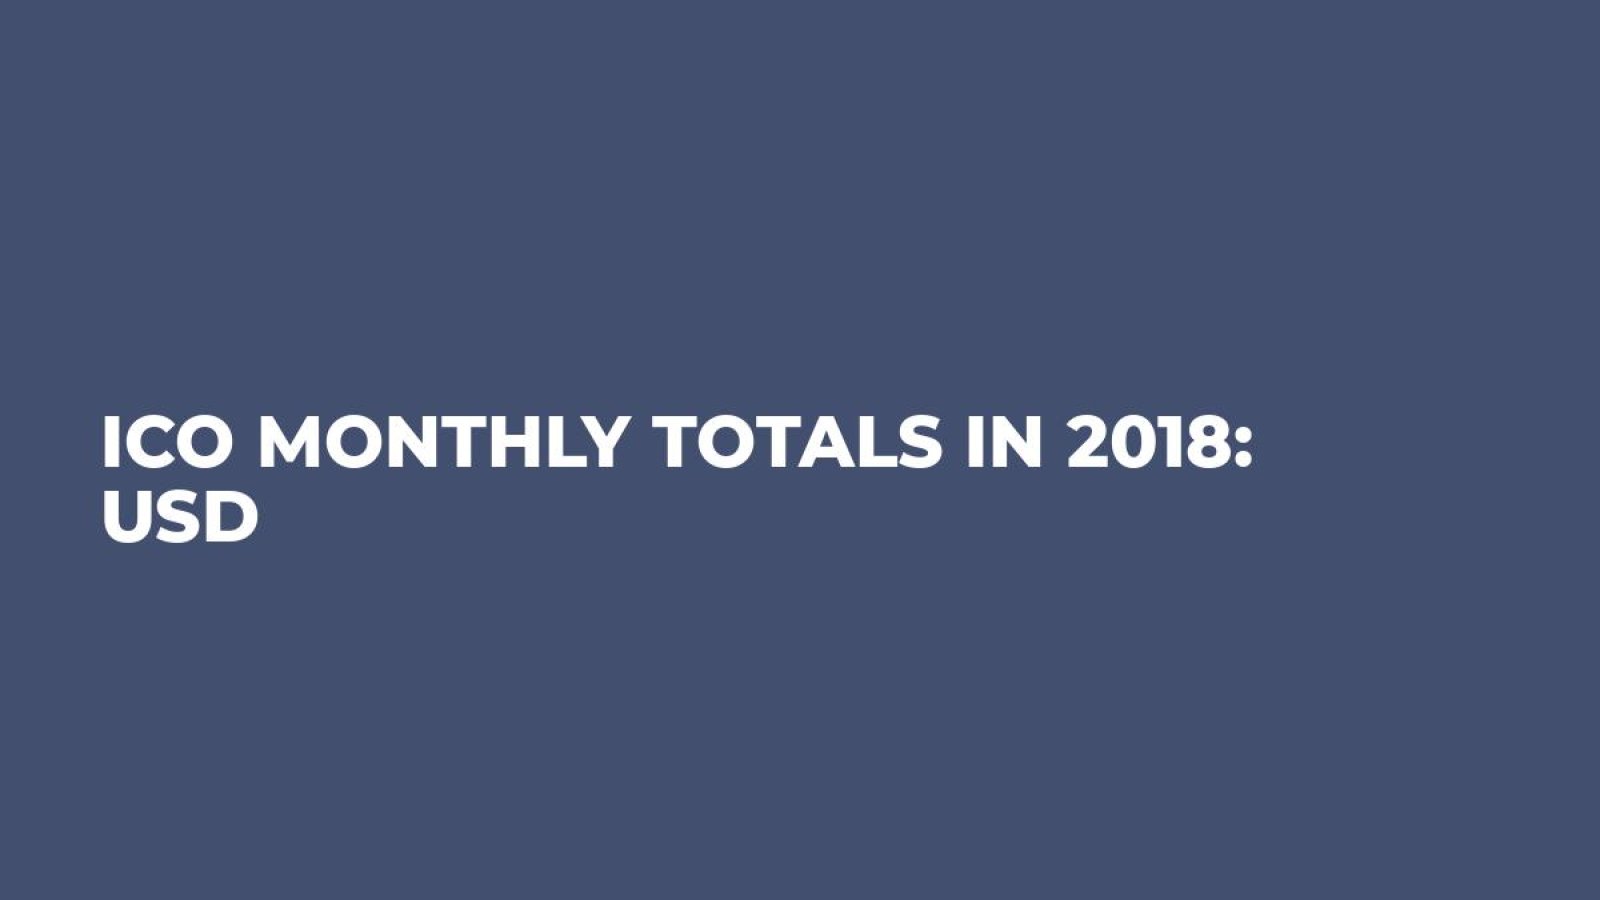 ICO Monthly Totals in 2018: USD